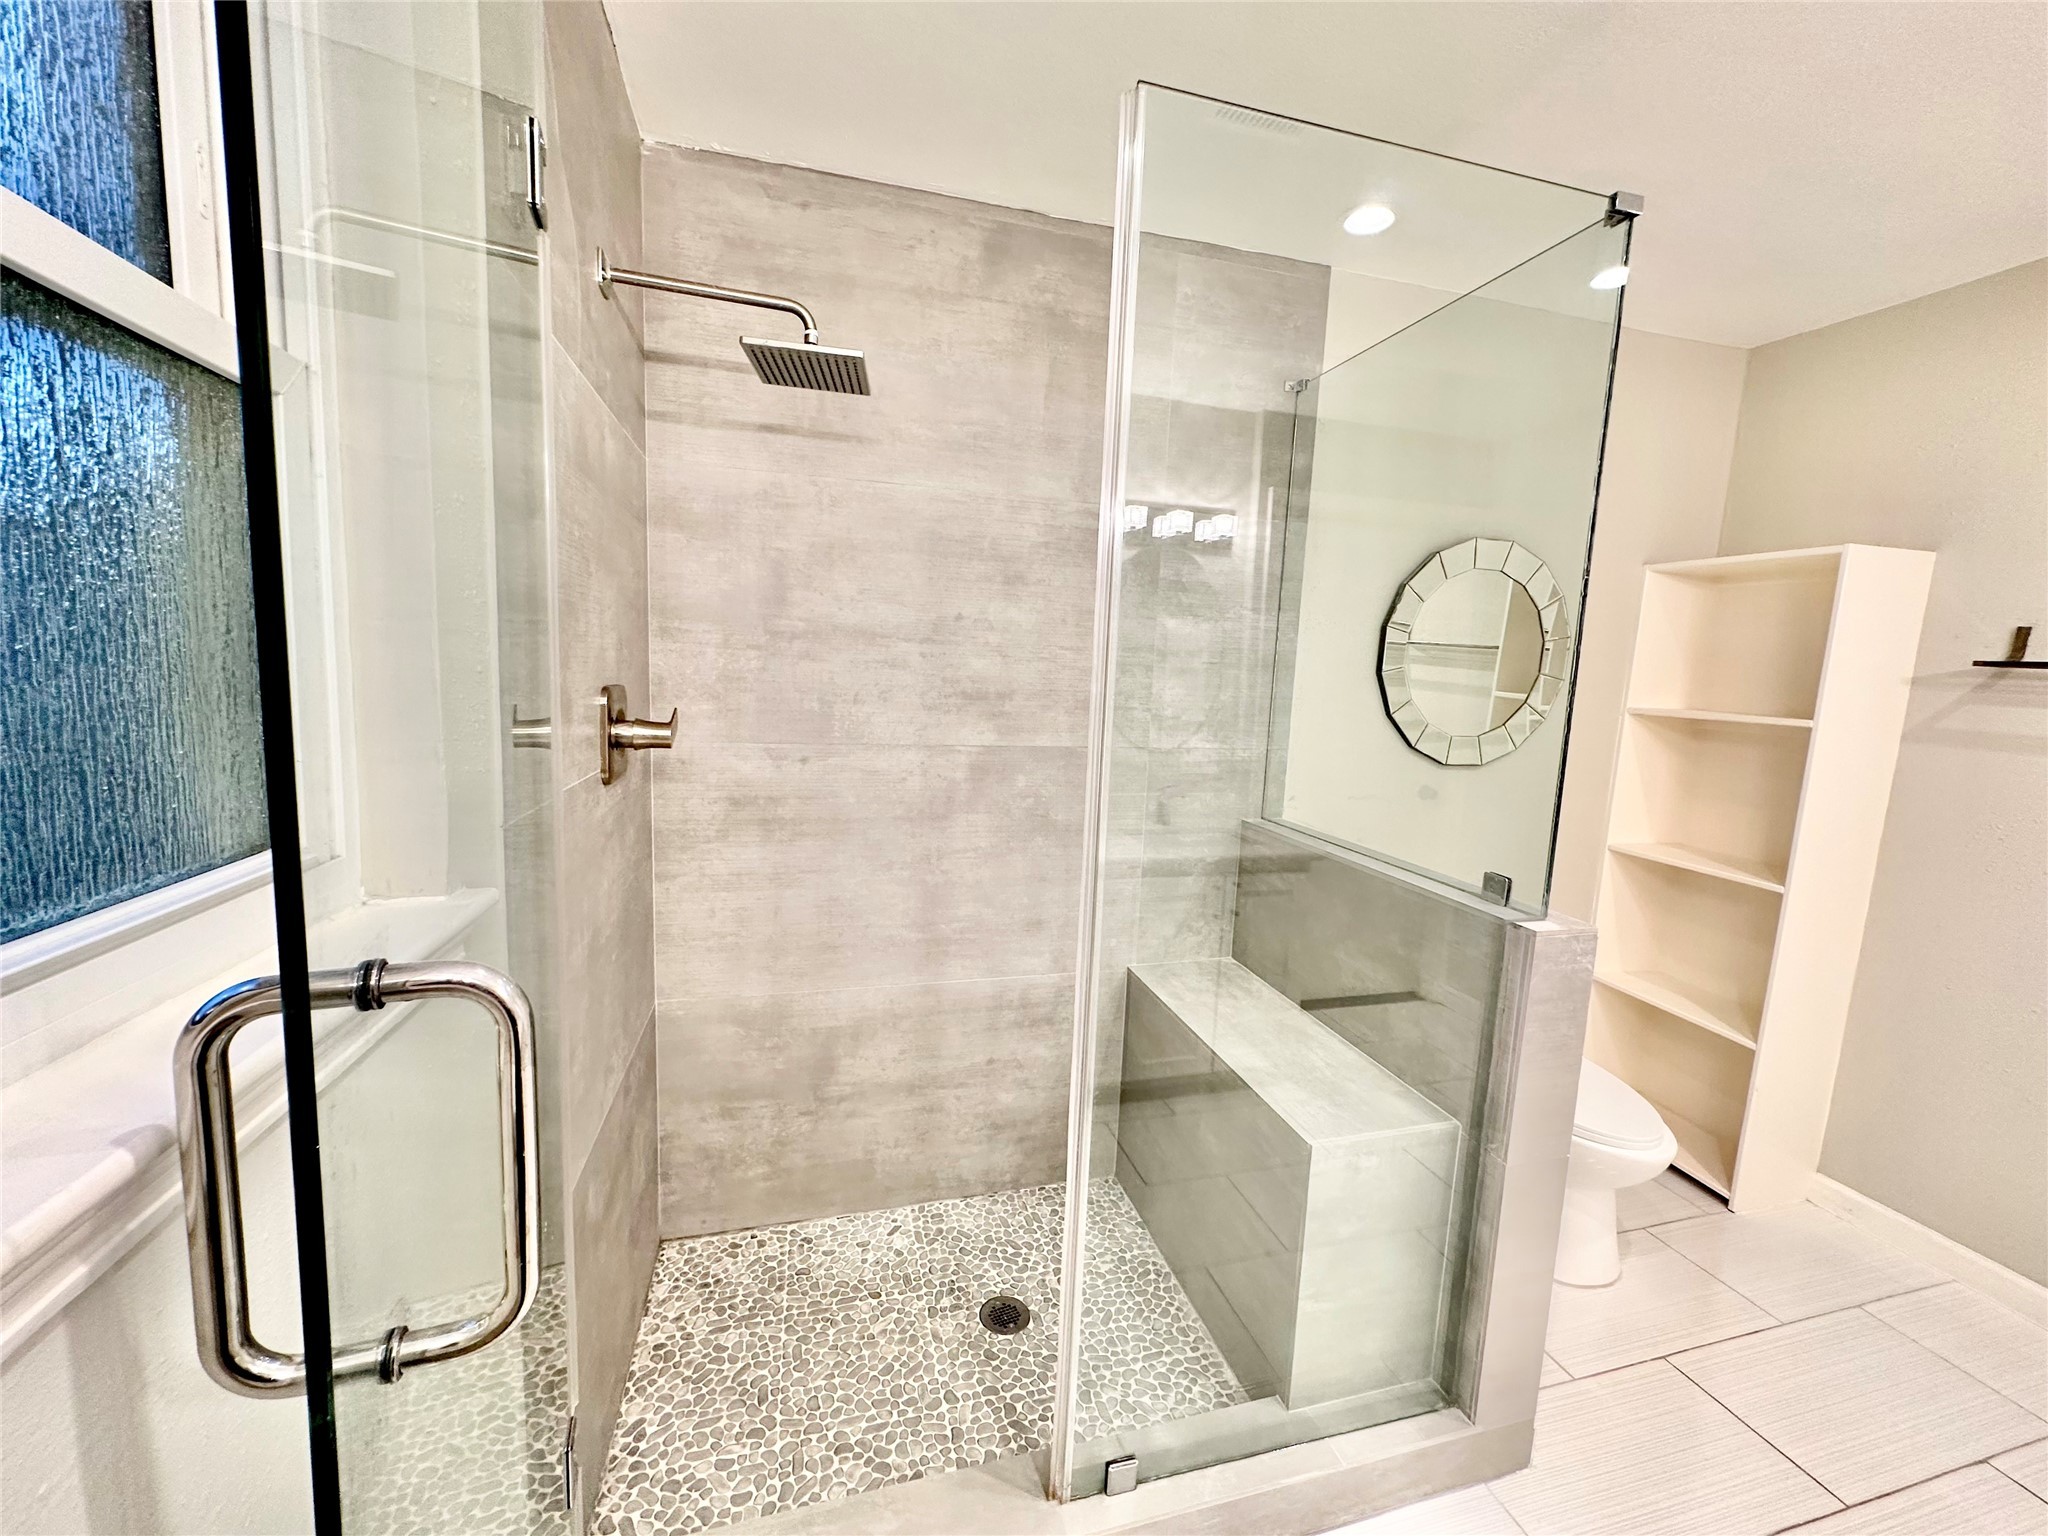 Take a refreshing rinse in the newly updated rimless glass enclosed shower with luxurious floor tile work and surround tiles all the way to the top and a comfy bench.